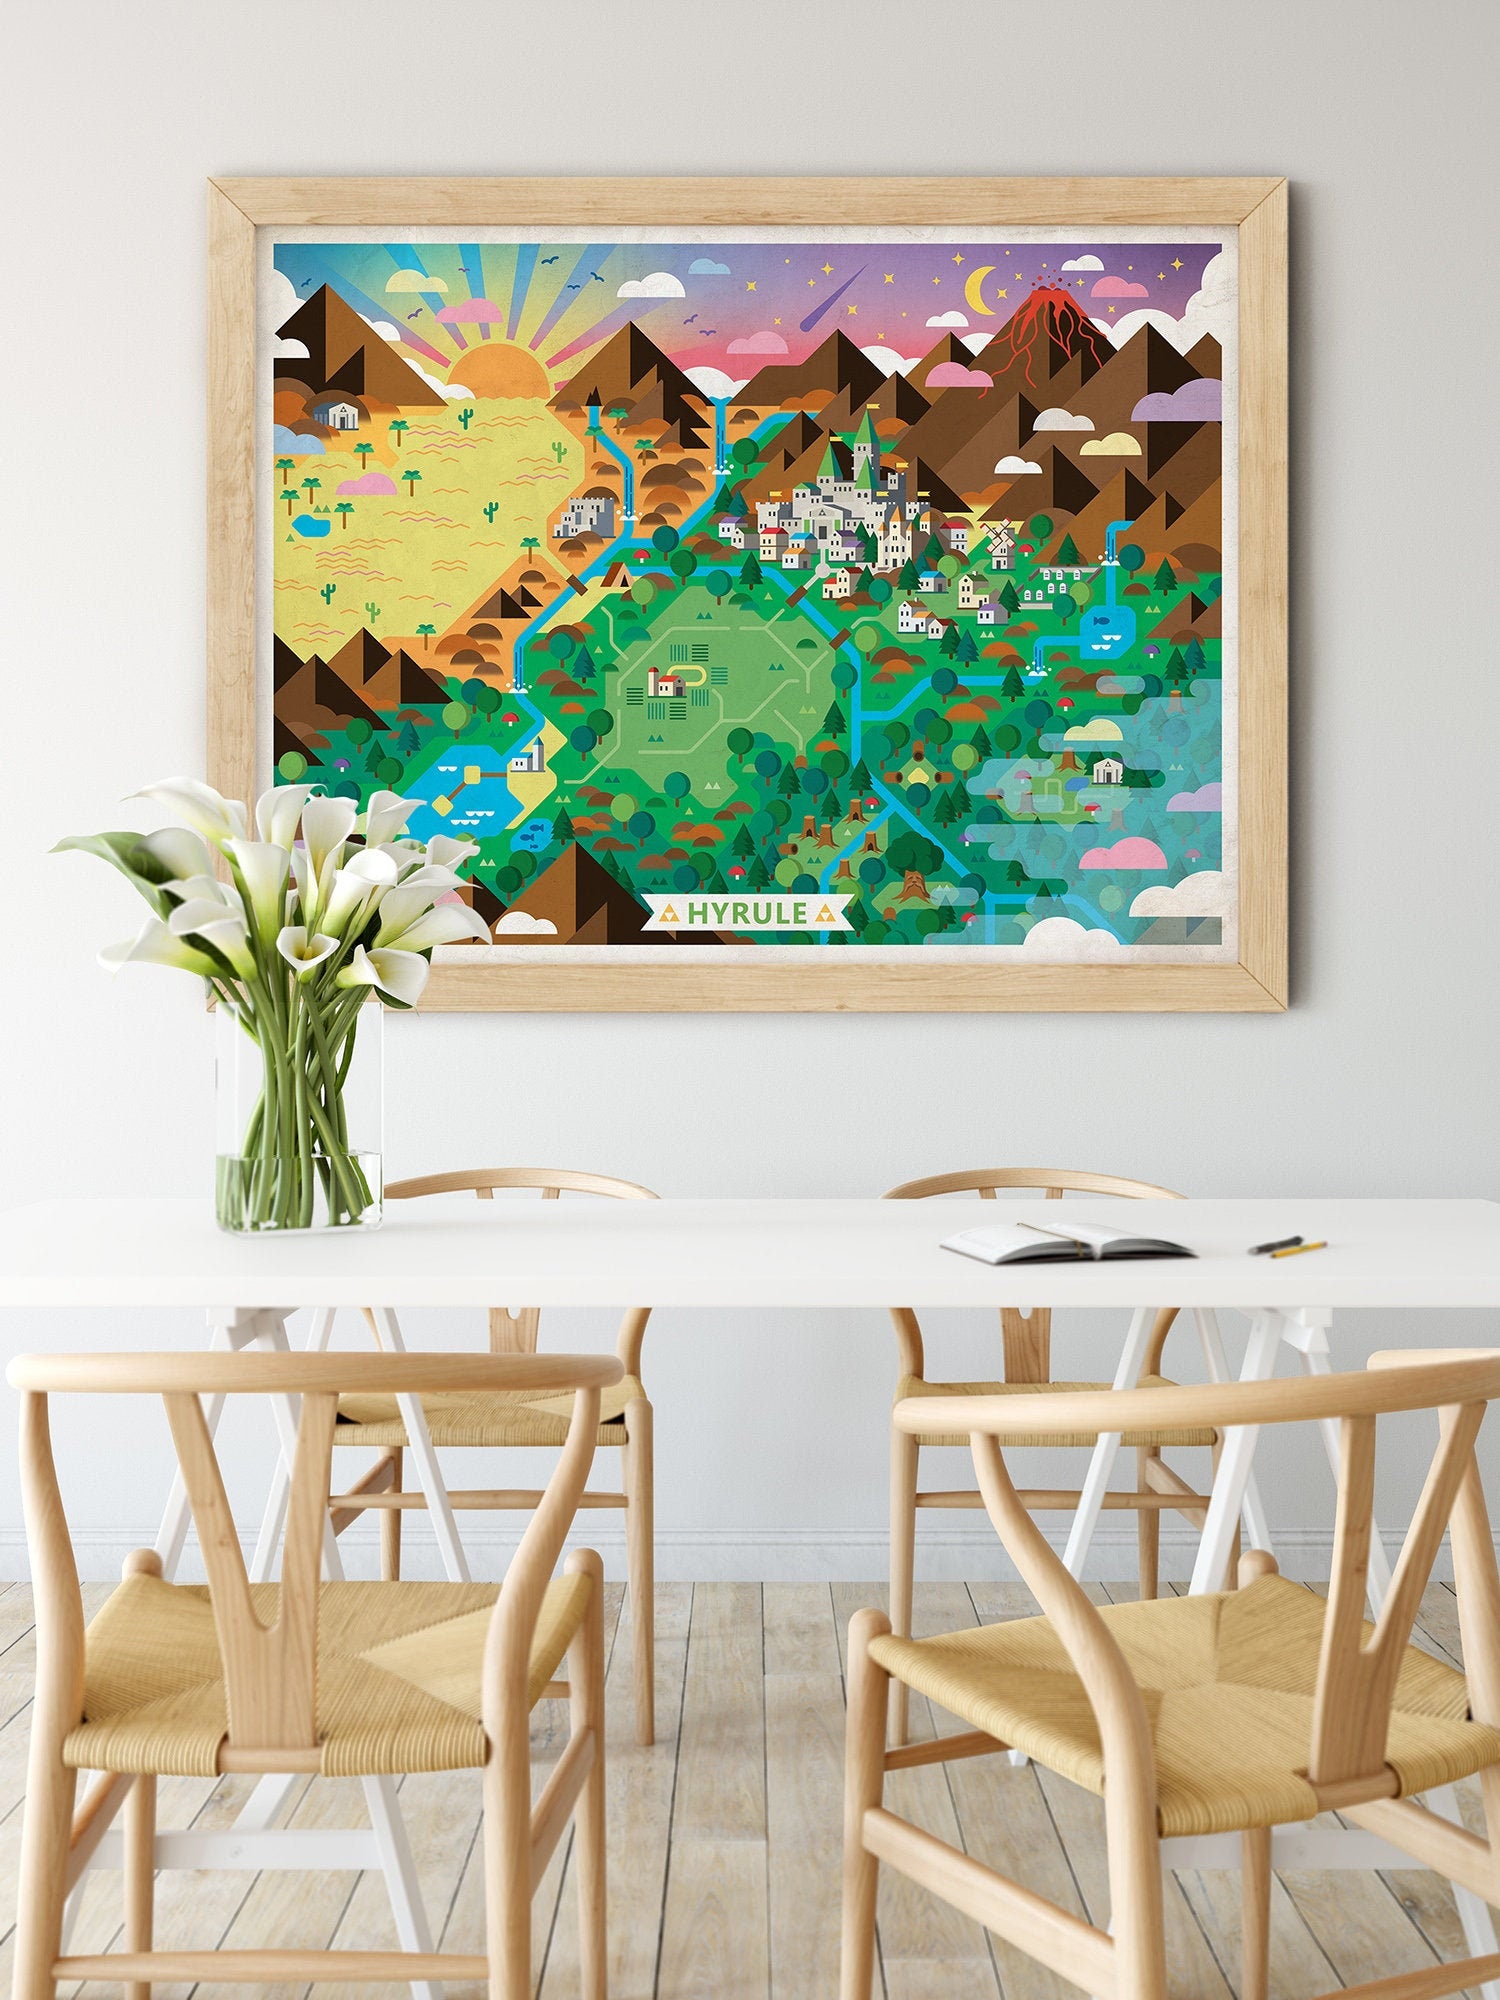 Legend of Zelda: A Link to the Past, Map of Hyrule - Canvas Wrap Print -  PersonalThrows